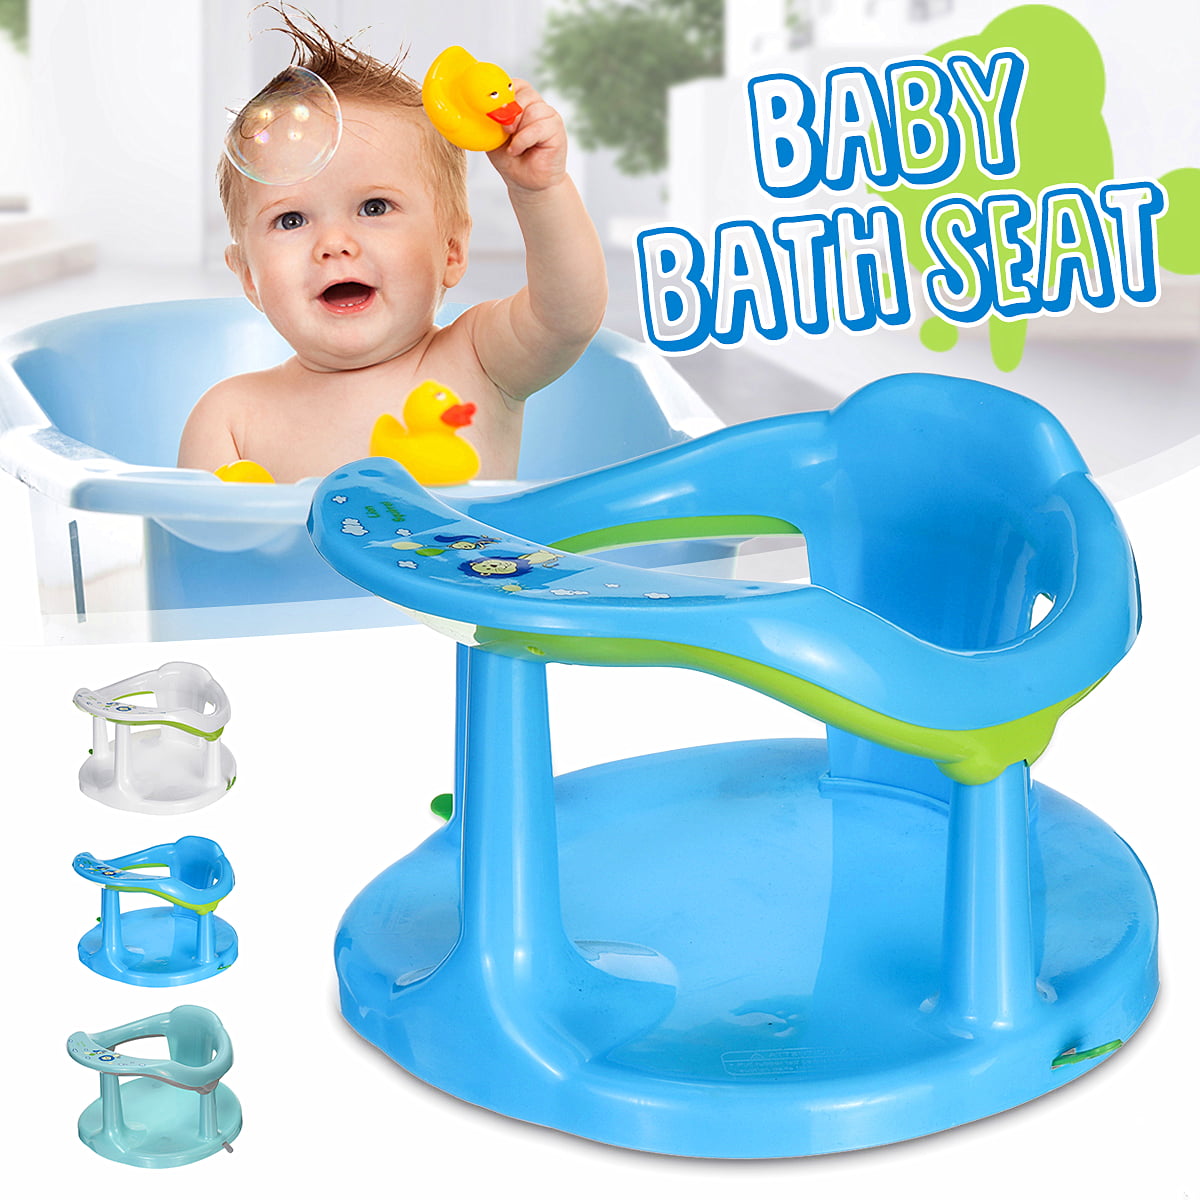 baby bath seat for 1 year old